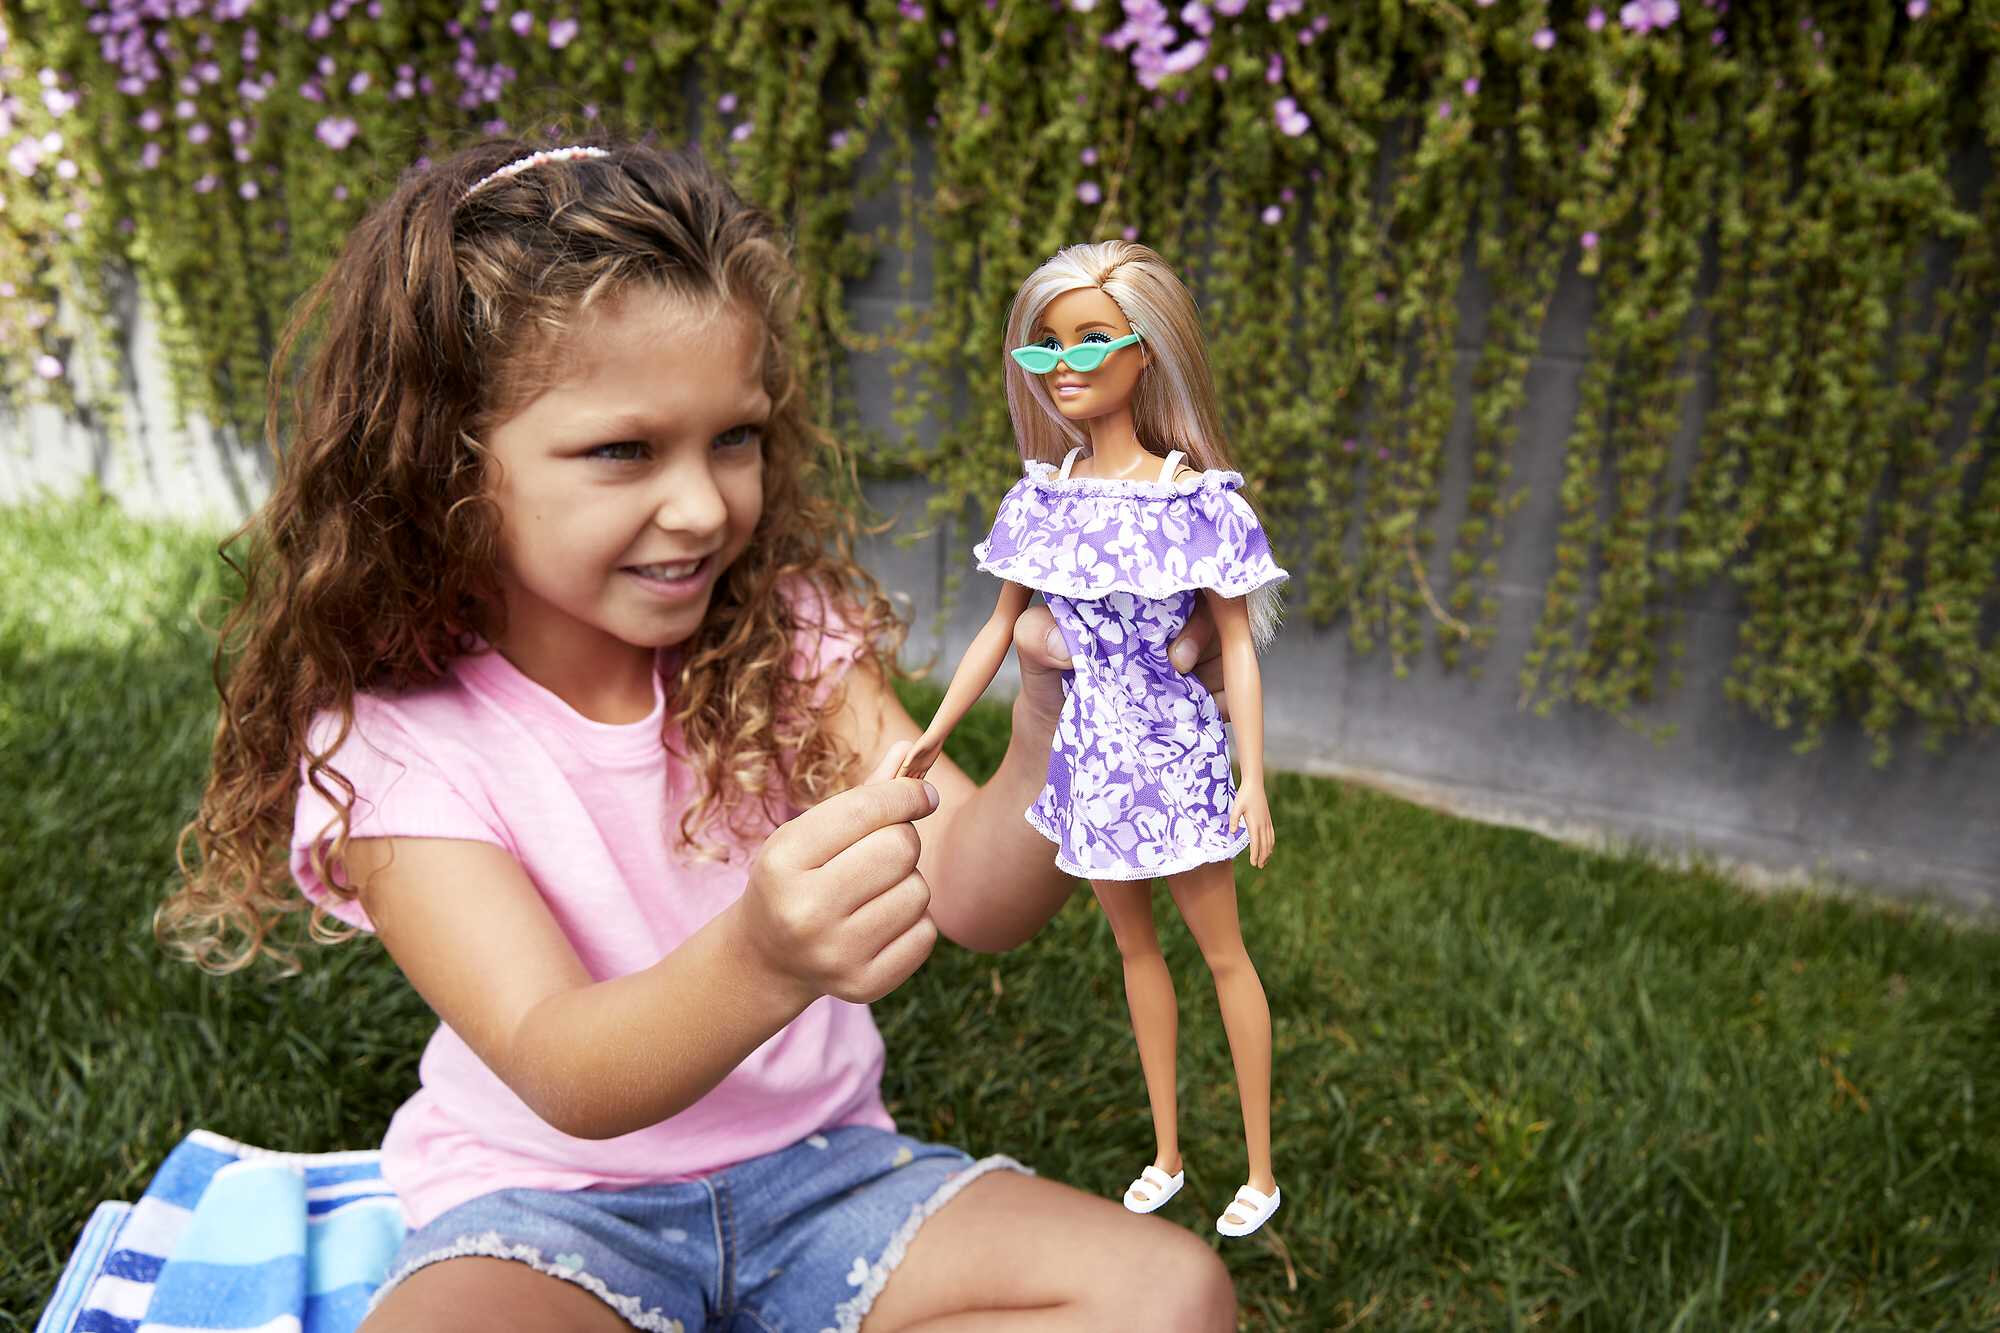 Barbie Loves the Ocean Beach Doll with Blonde Hair in Sundress, Made from Recycled Plastics - image 2 of 6